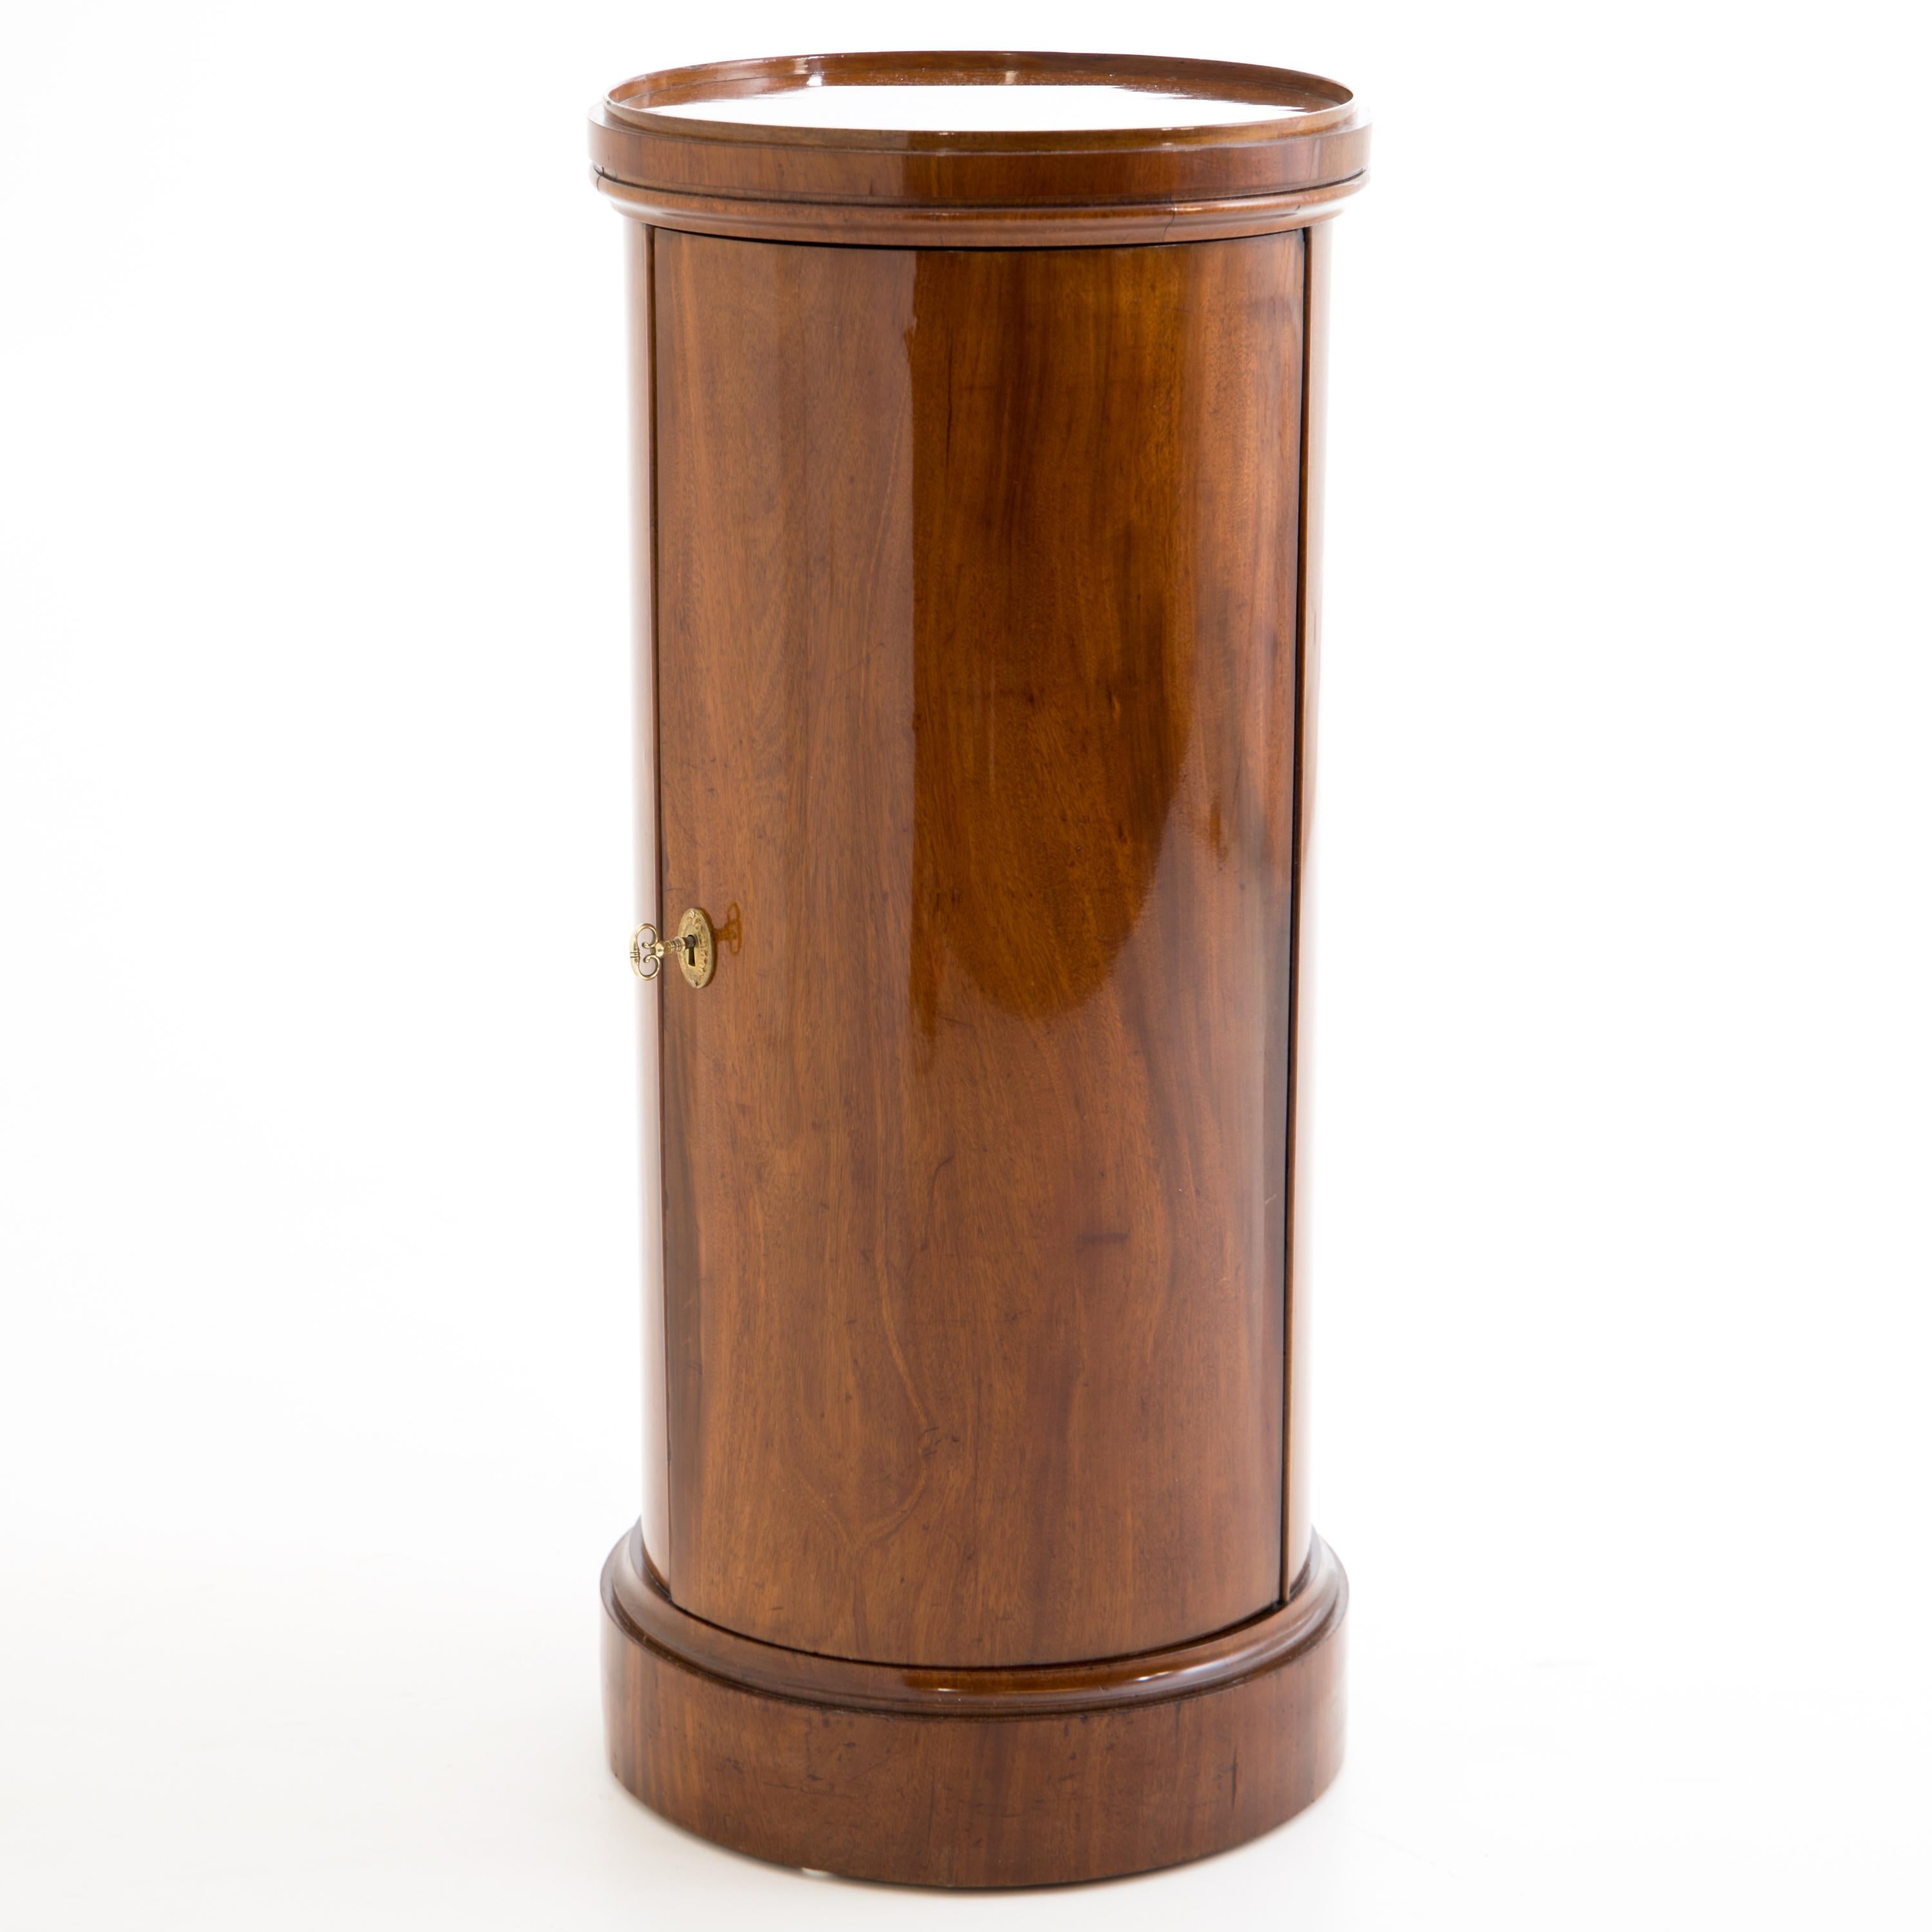 Biedermeier Drum cabinet veneered in mahogany. The round body with one door stands on a slightly profiled plinth. The top is also slightly profiled and veneered. The interior division consists of two shelves. The cabinet has been expertly restored